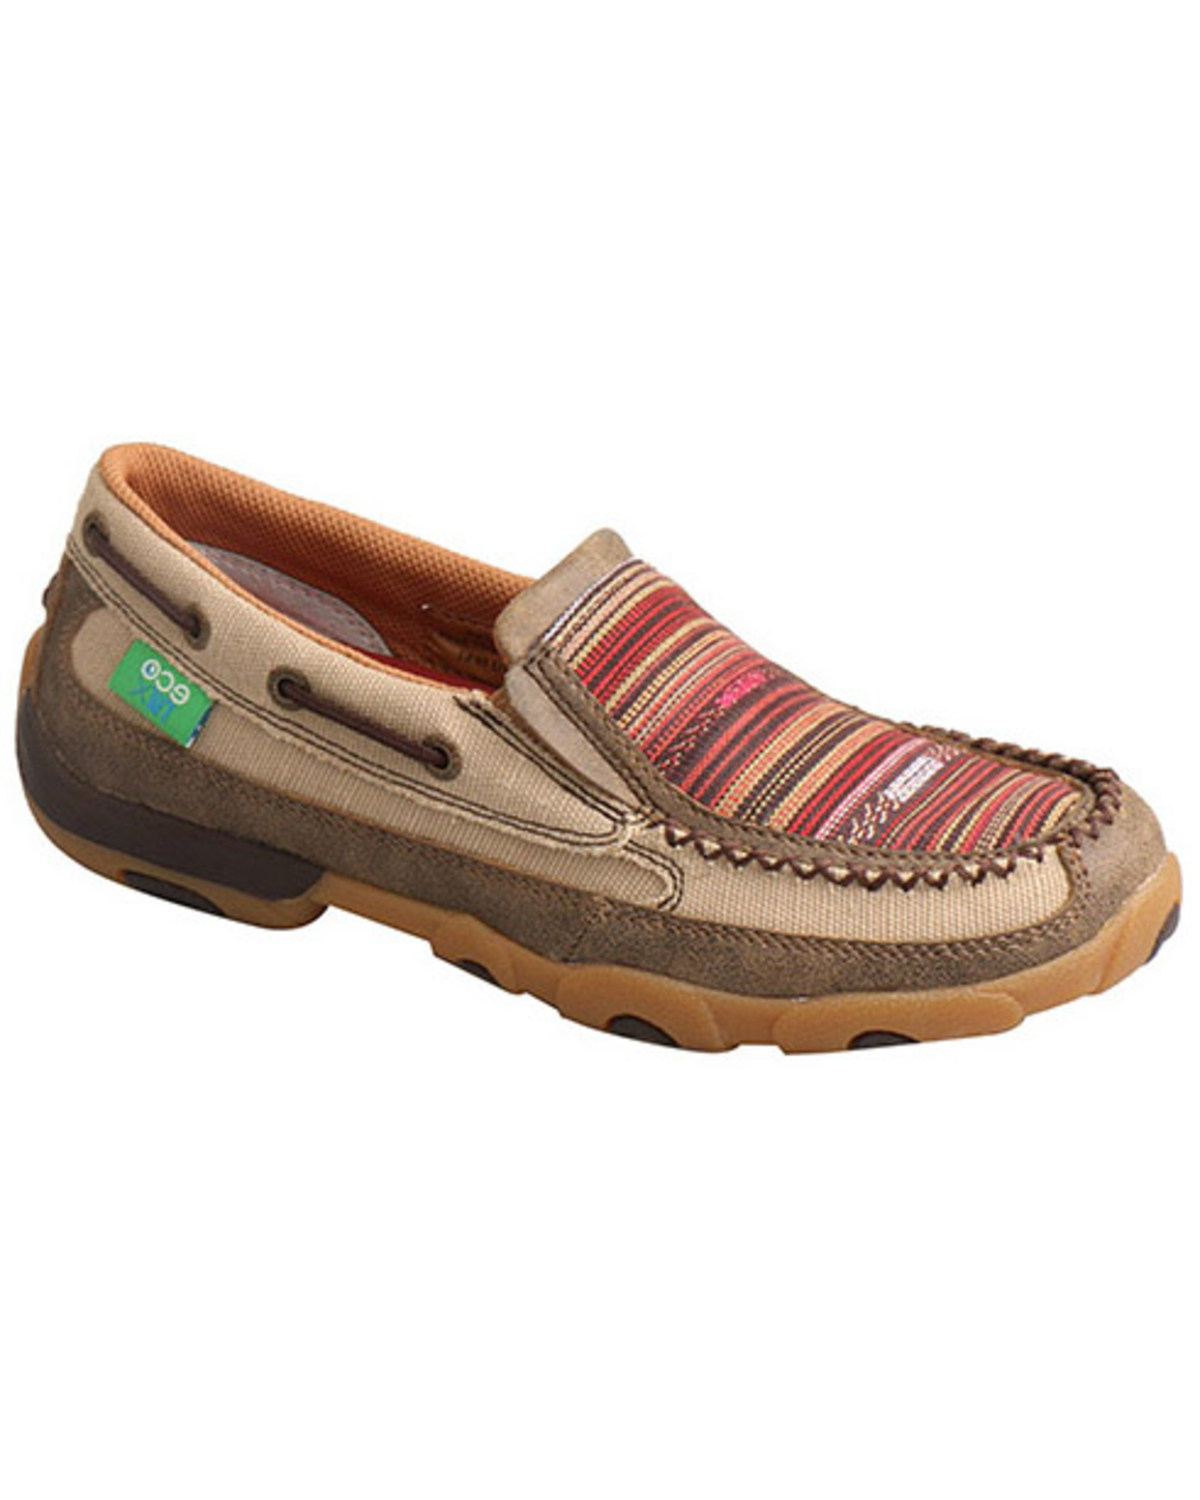 Twisted X Women's Multicolor ECO TWX Driving Moccasin Shoes - Moc Toe